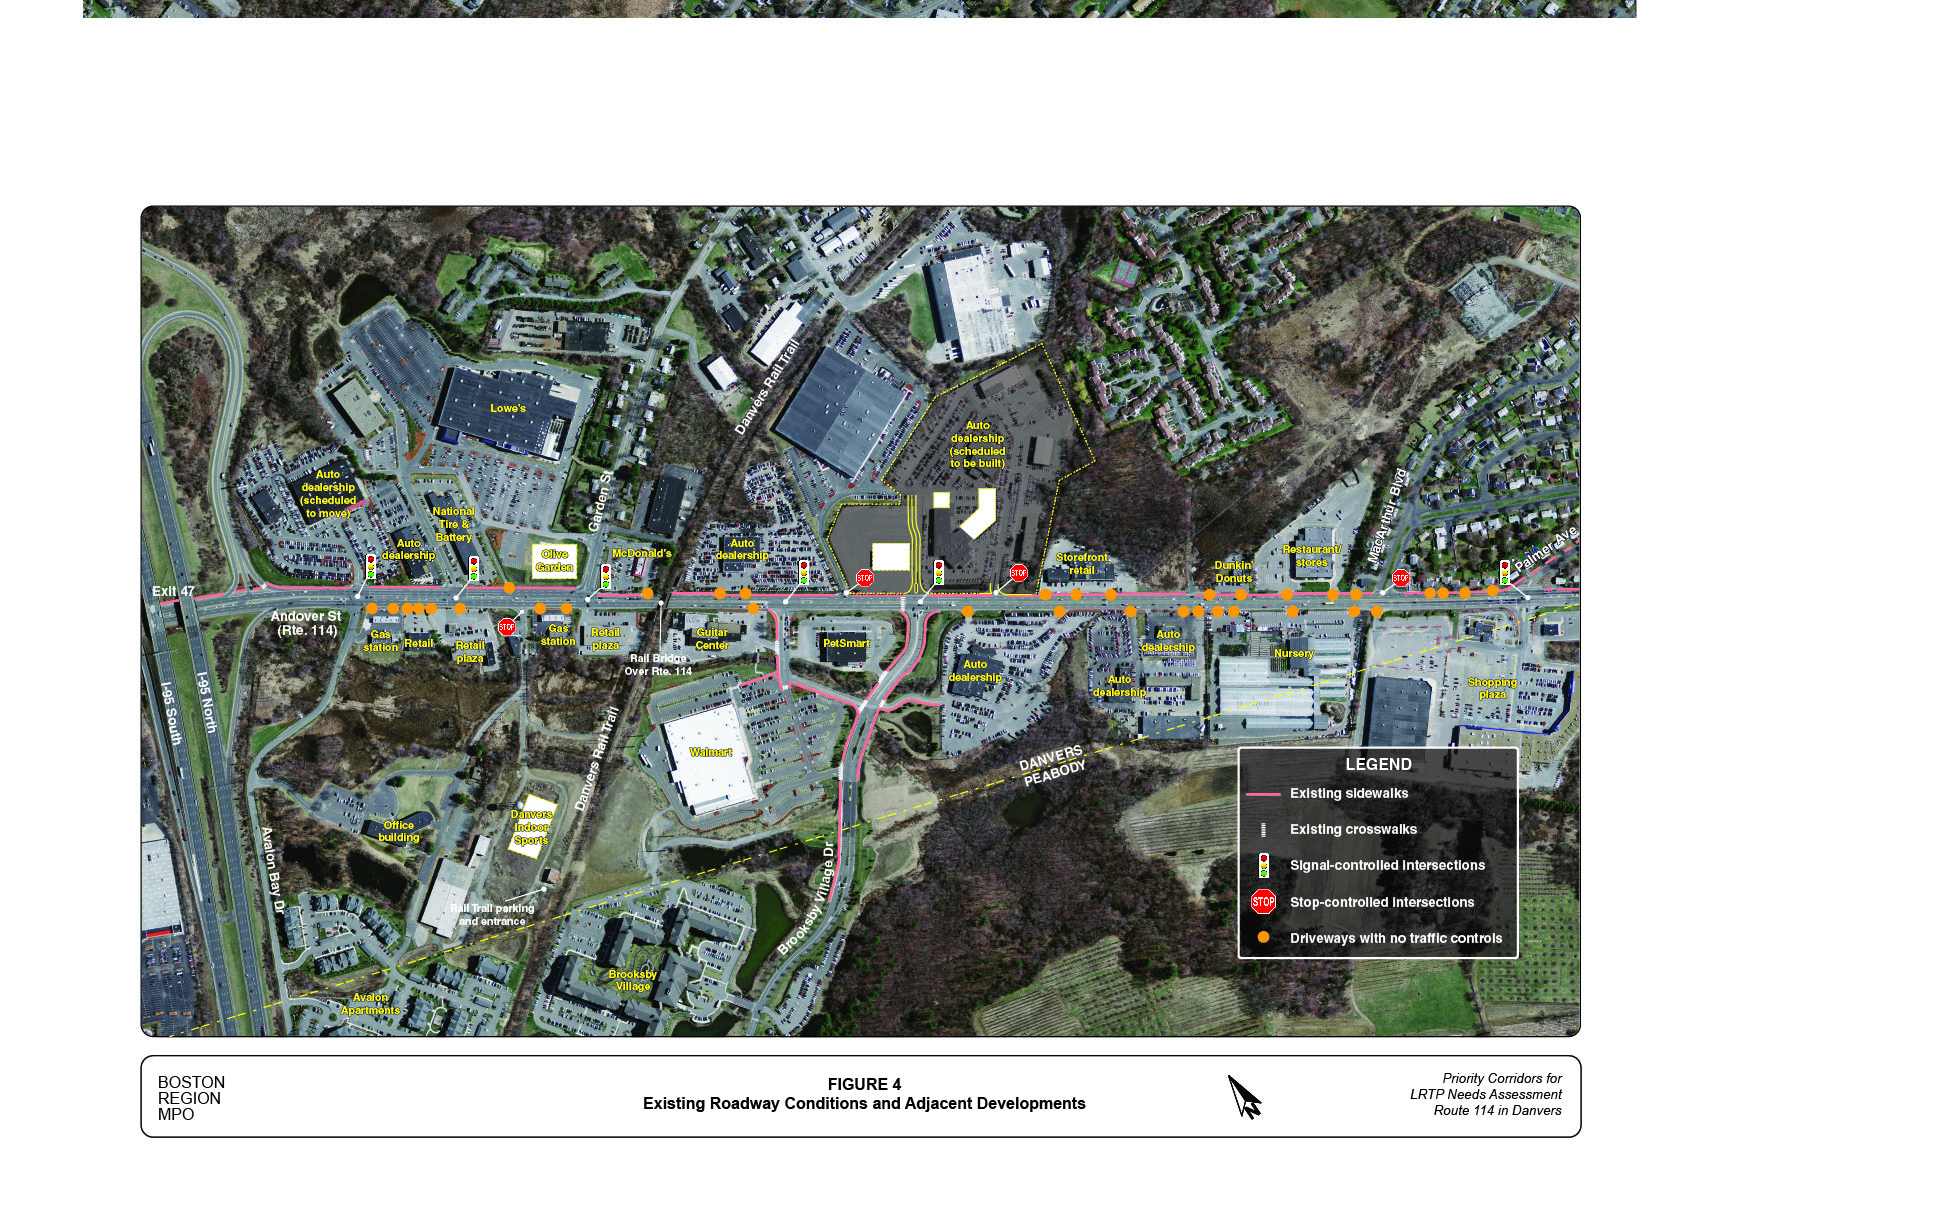 Figure 4 shows the existing traffic and pedestrian facilities, driveway locations, and adjacent developments in the study corridor.